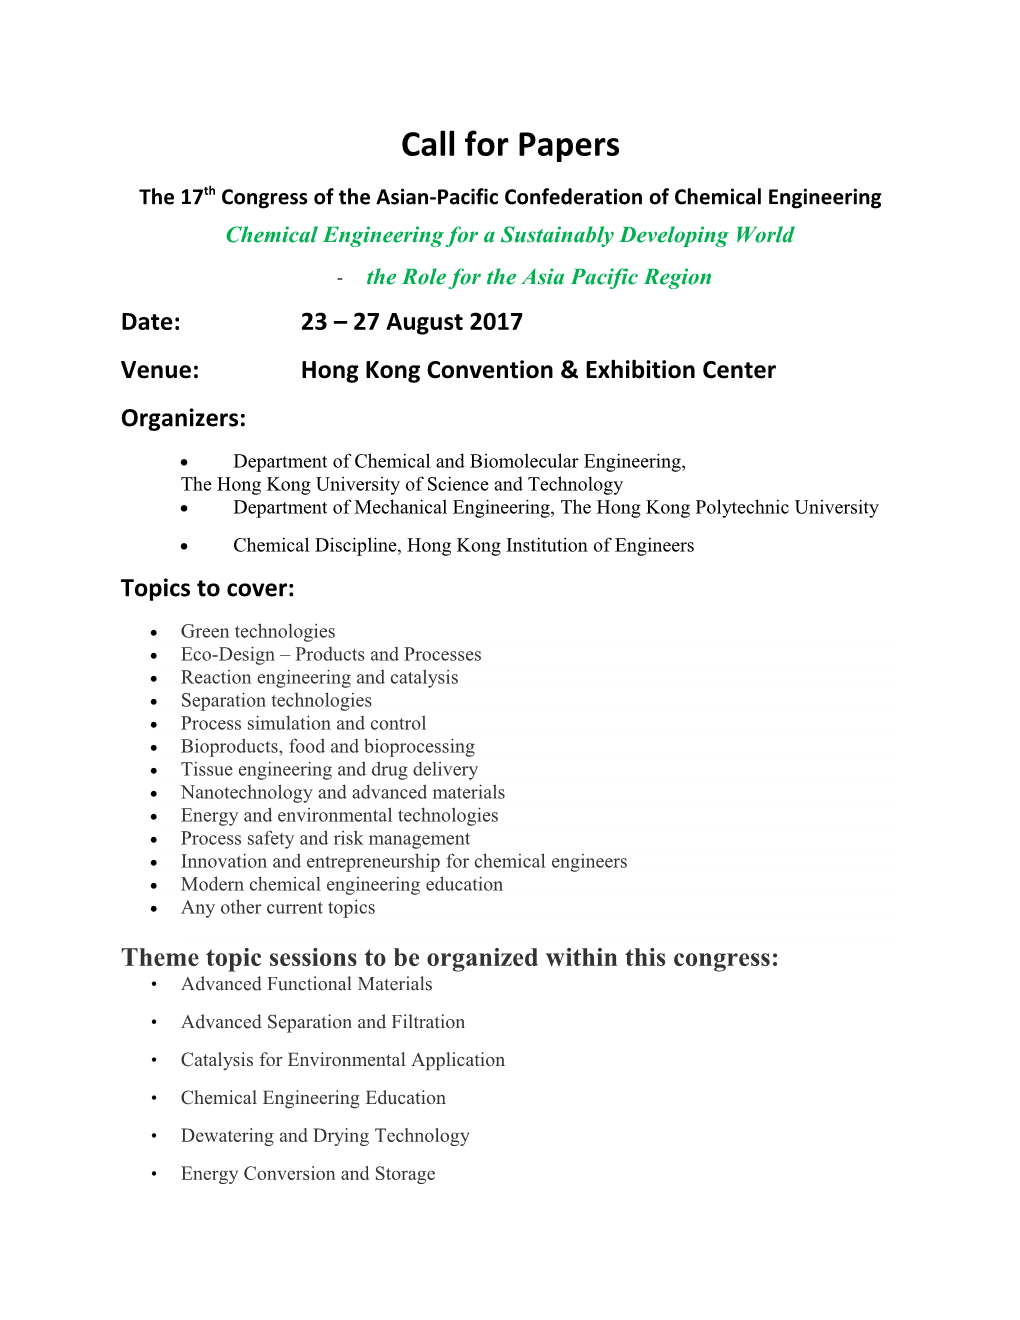 The 17Th Congress of the Asian-Pacific Confederation of Chemical Engineering